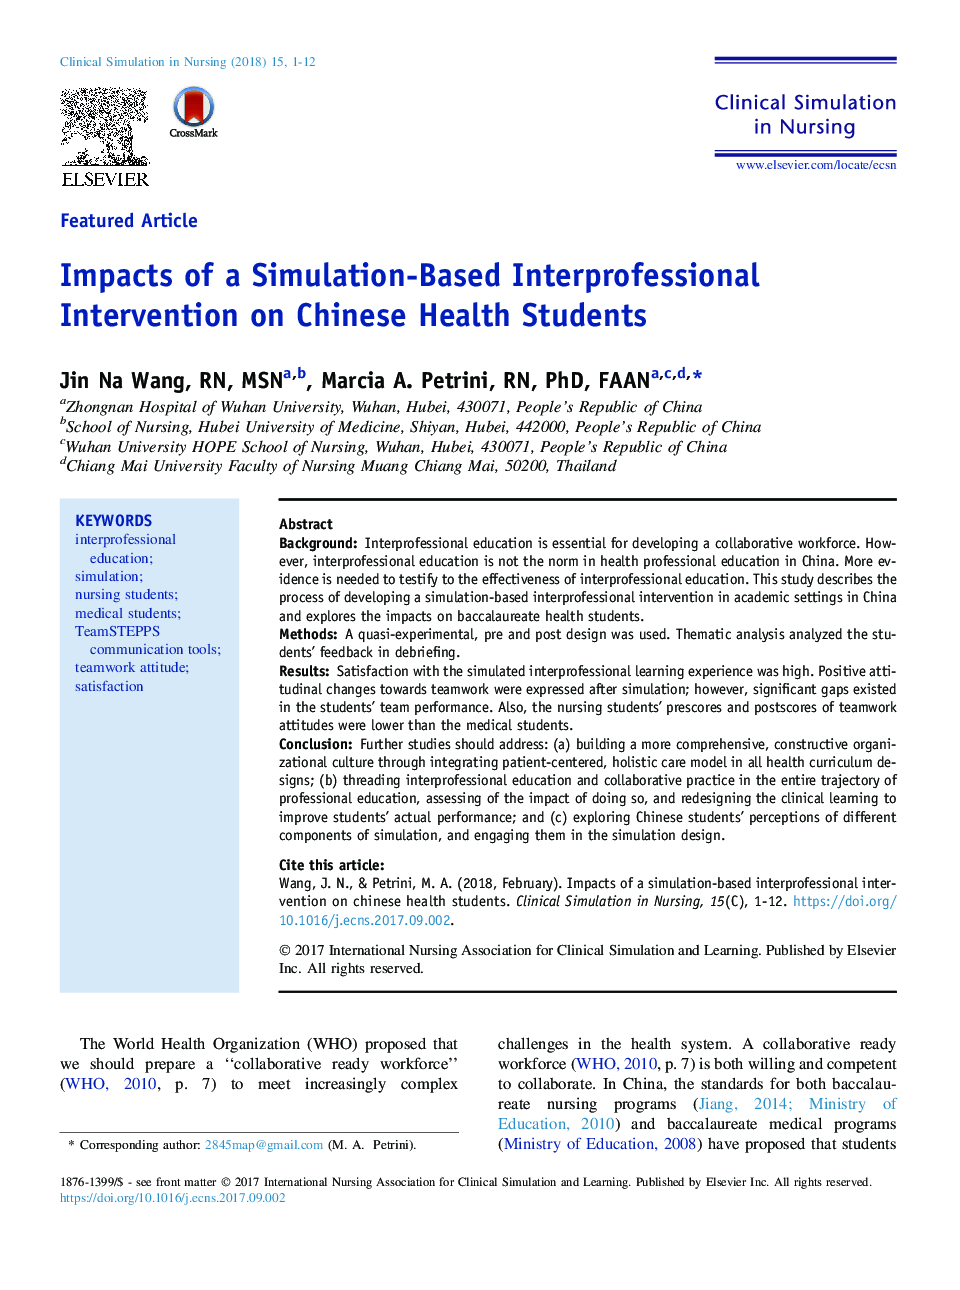 Impacts of a Simulation-Based Interprofessional Intervention on Chinese Health Students